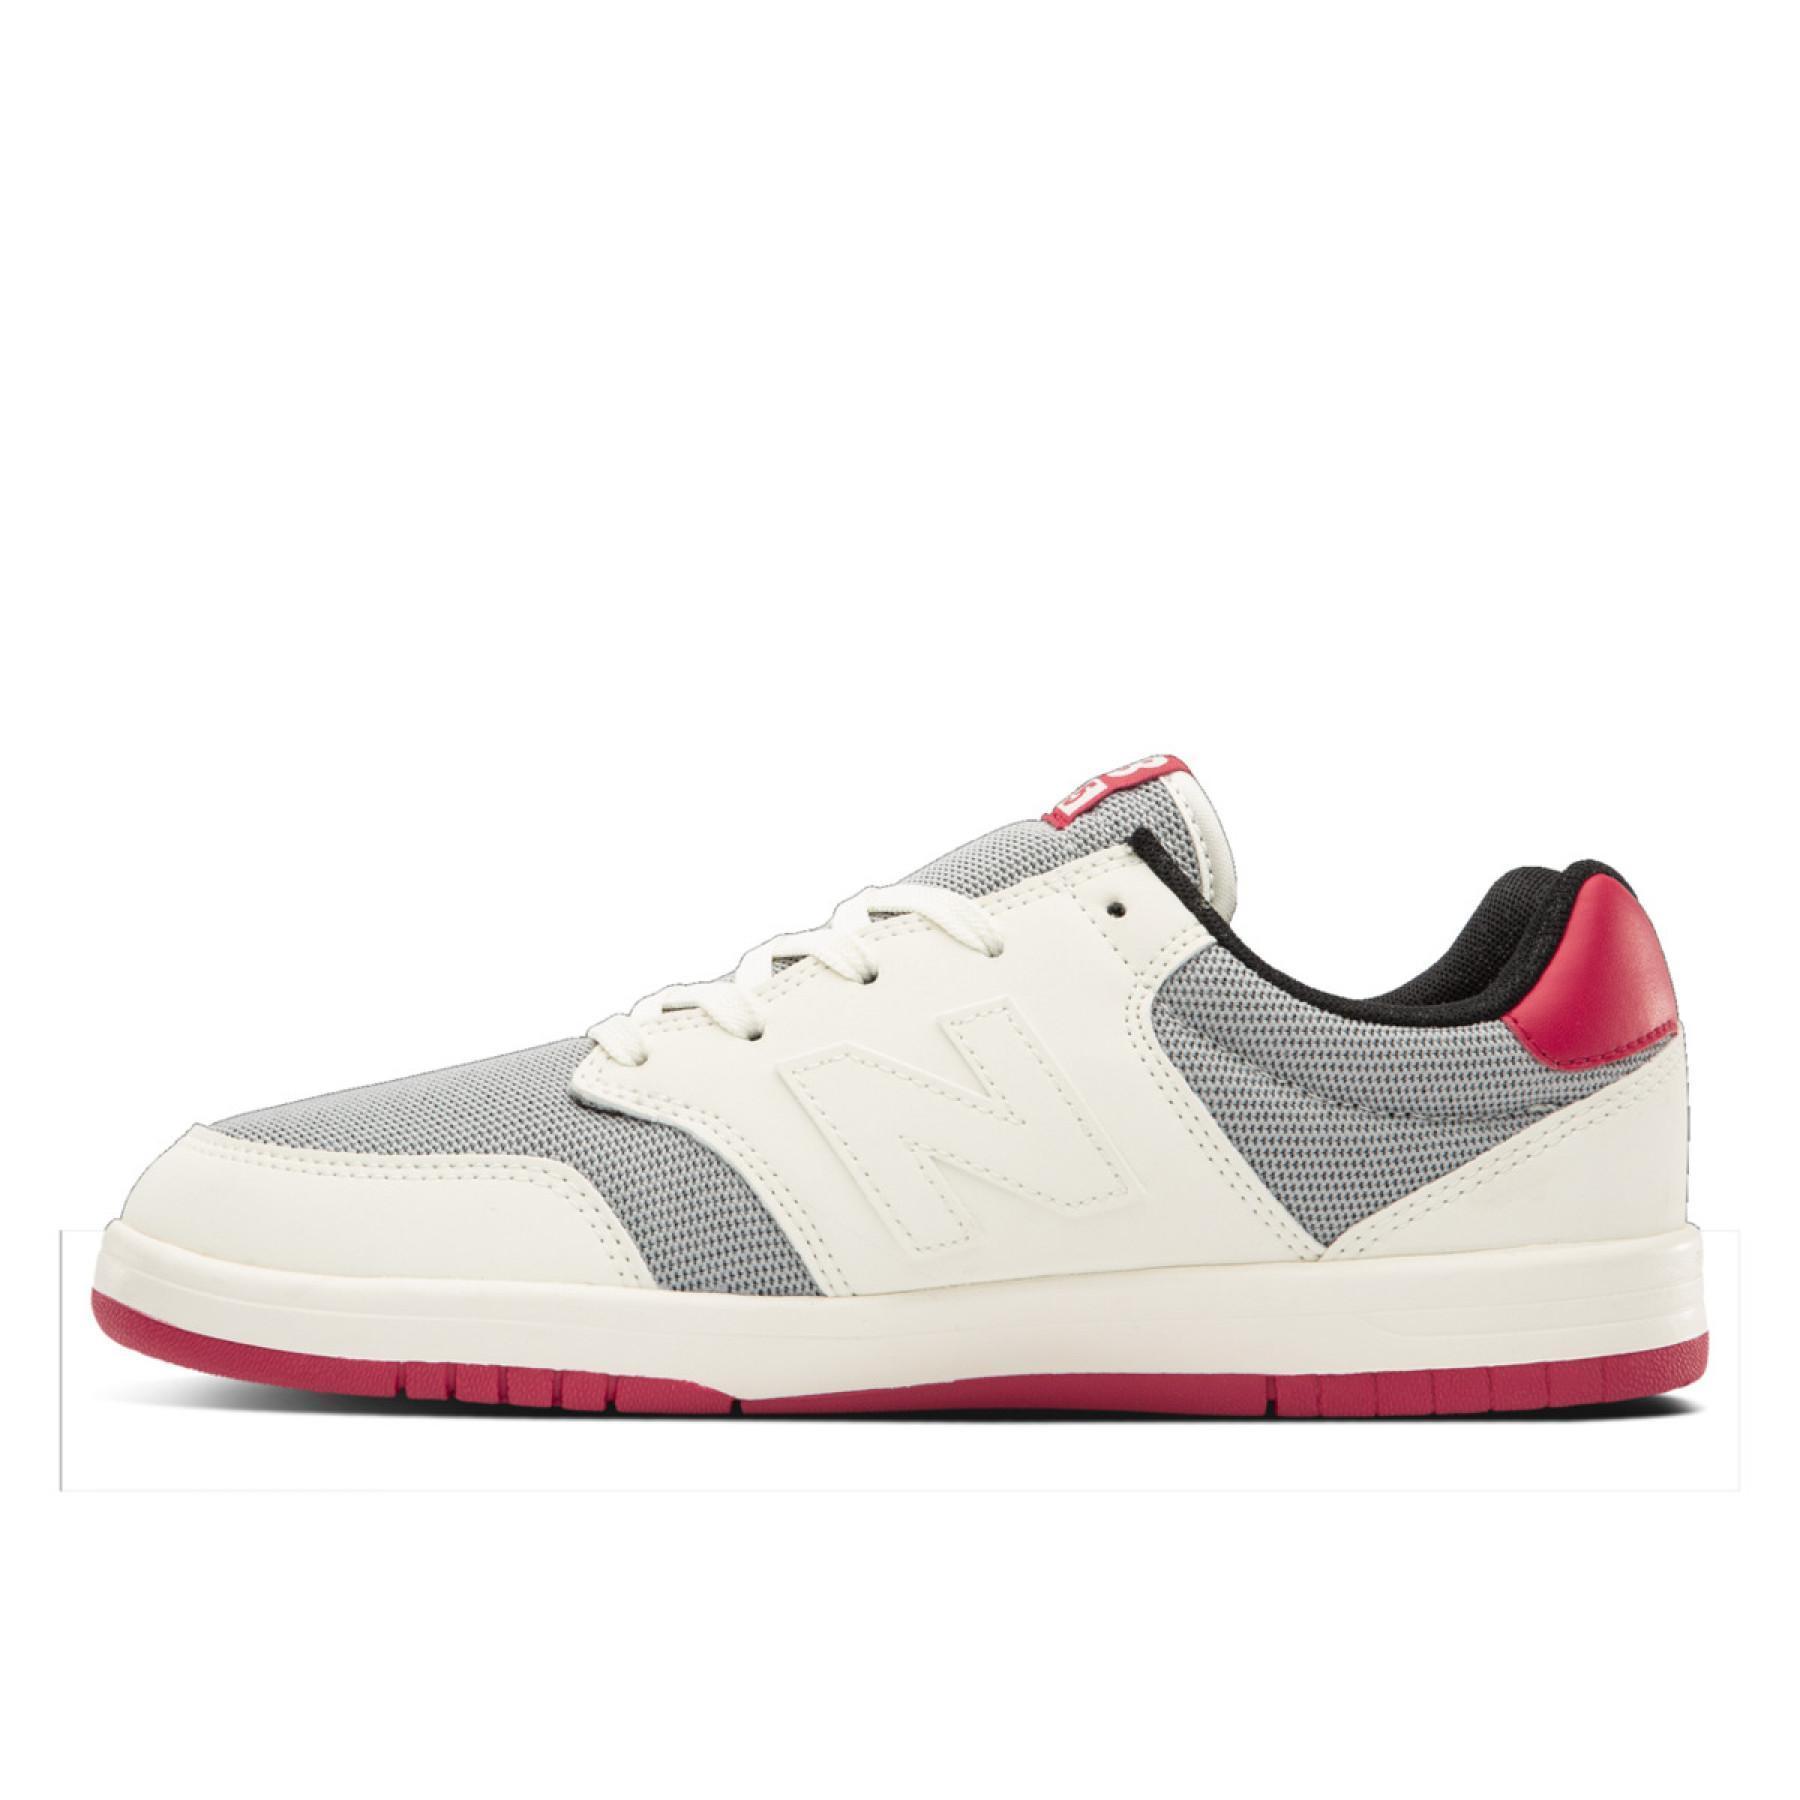 Formadores New Balance all coasts am425